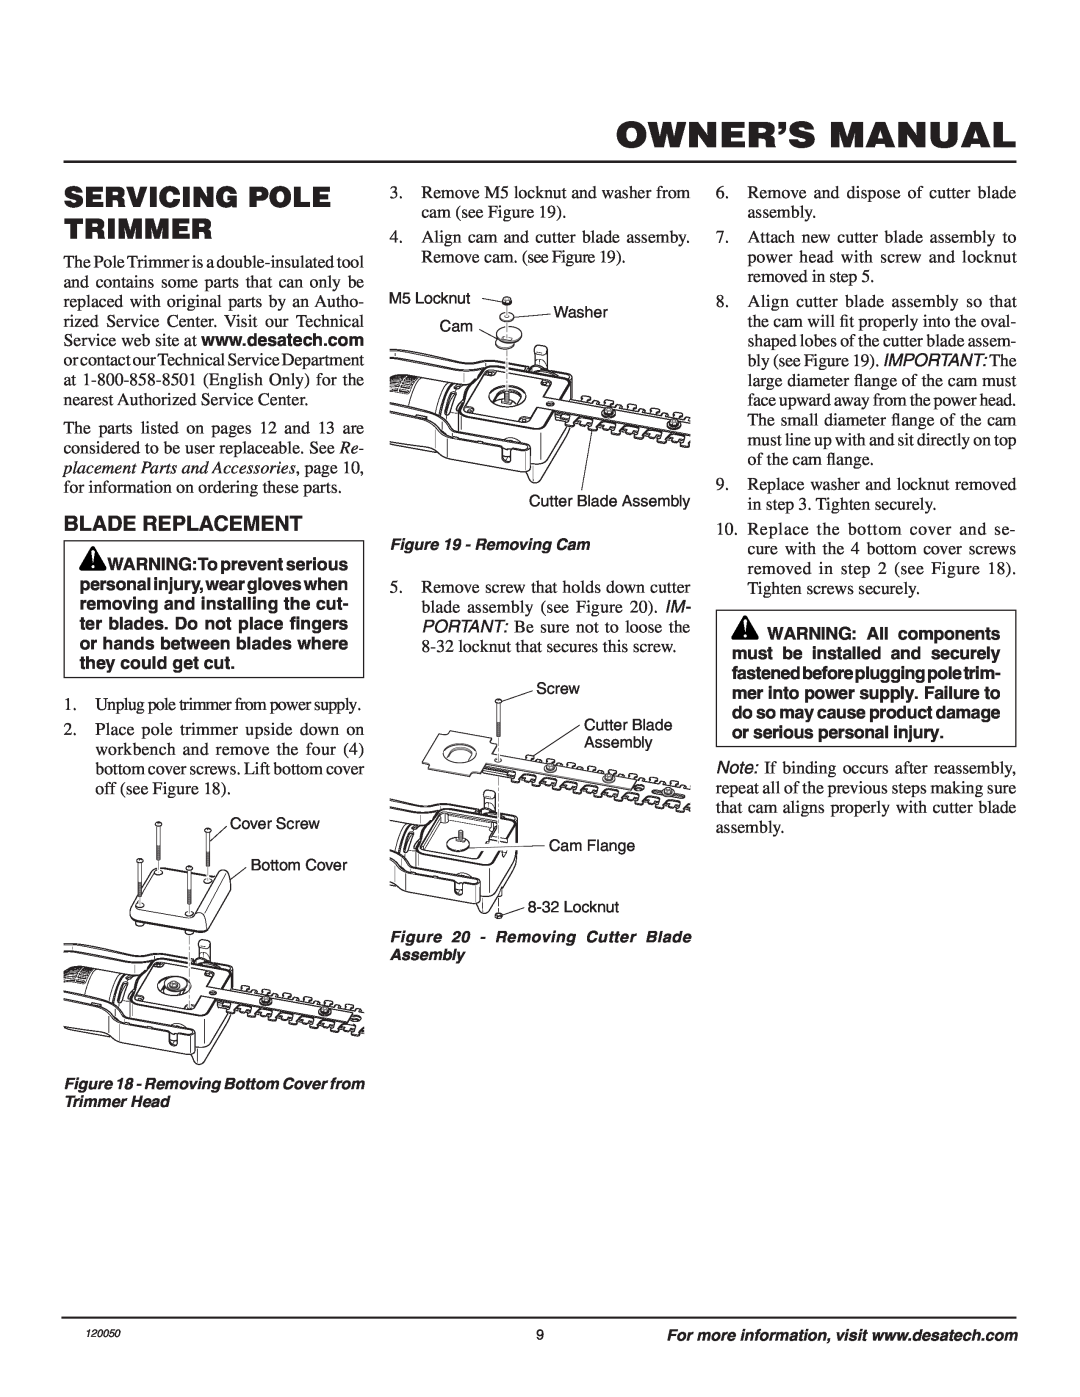 Remington AT3017BCA owner manual Servicing Pole Trimmer, Blade Replacement 